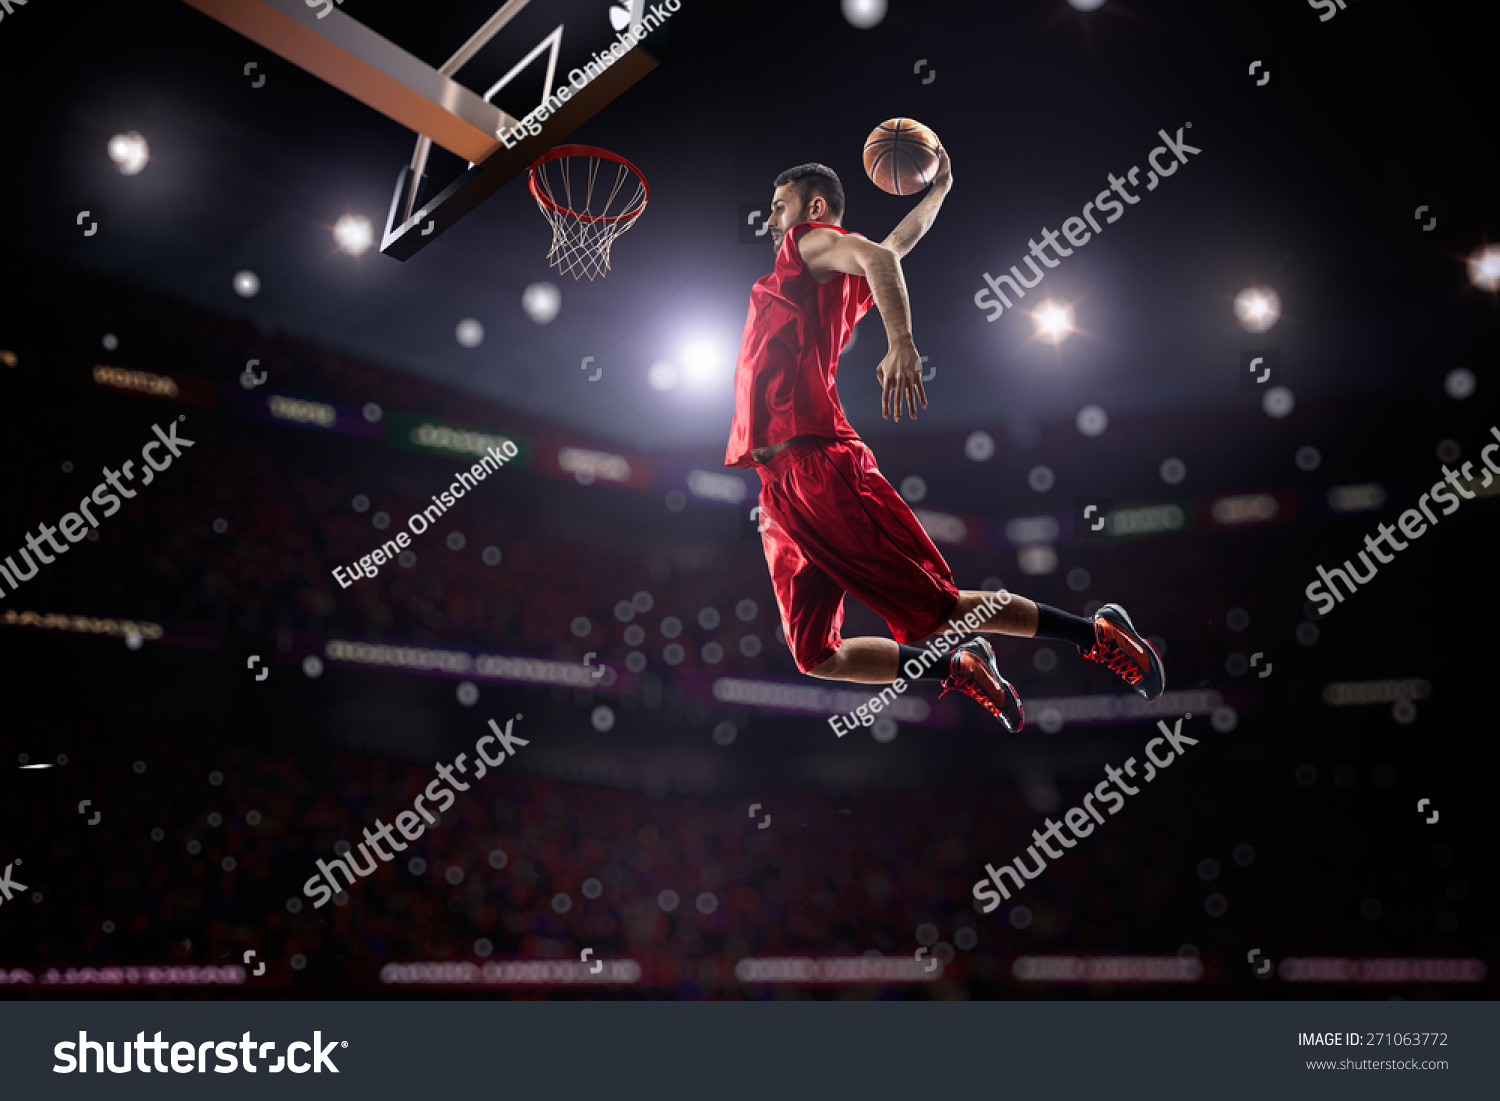 red Basketball player in action in gym #271063772